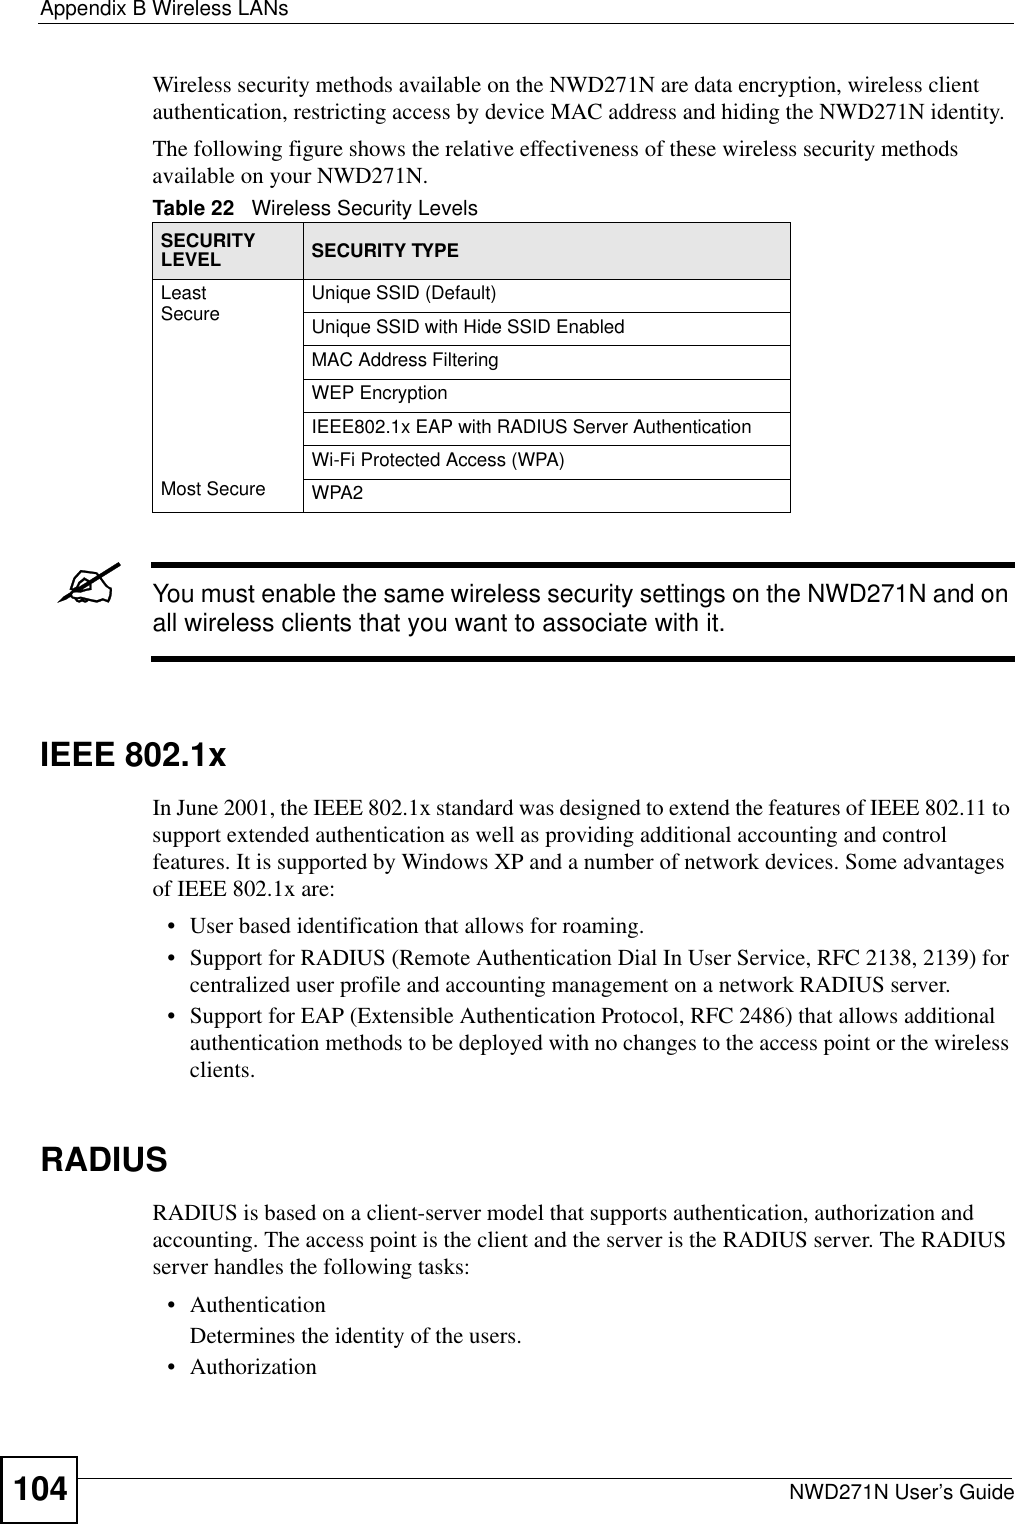 Appendix B Wireless LANsNWD271N User’s Guide104Wireless security methods available on the NWD271N are data encryption, wireless client authentication, restricting access by device MAC address and hiding the NWD271N identity.The following figure shows the relative effectiveness of these wireless security methods available on your NWD271N.&quot;You must enable the same wireless security settings on the NWD271N and on all wireless clients that you want to associate with it. IEEE 802.1xIn June 2001, the IEEE 802.1x standard was designed to extend the features of IEEE 802.11 to support extended authentication as well as providing additional accounting and control features. It is supported by Windows XP and a number of network devices. Some advantages of IEEE 802.1x are:• User based identification that allows for roaming.• Support for RADIUS (Remote Authentication Dial In User Service, RFC 2138, 2139) for centralized user profile and accounting management on a network RADIUS server. • Support for EAP (Extensible Authentication Protocol, RFC 2486) that allows additional authentication methods to be deployed with no changes to the access point or the wireless clients. RADIUSRADIUS is based on a client-server model that supports authentication, authorization and accounting. The access point is the client and the server is the RADIUS server. The RADIUS server handles the following tasks:• Authentication Determines the identity of the users.• AuthorizationTable 22   Wireless Security LevelsSECURITY LEVEL SECURITY TYPELeast       S e c u r e                                                                                      Most SecureUnique SSID (Default)Unique SSID with Hide SSID EnabledMAC Address FilteringWEP EncryptionIEEE802.1x EAP with RADIUS Server AuthenticationWi-Fi Protected Access (WPA)WPA2